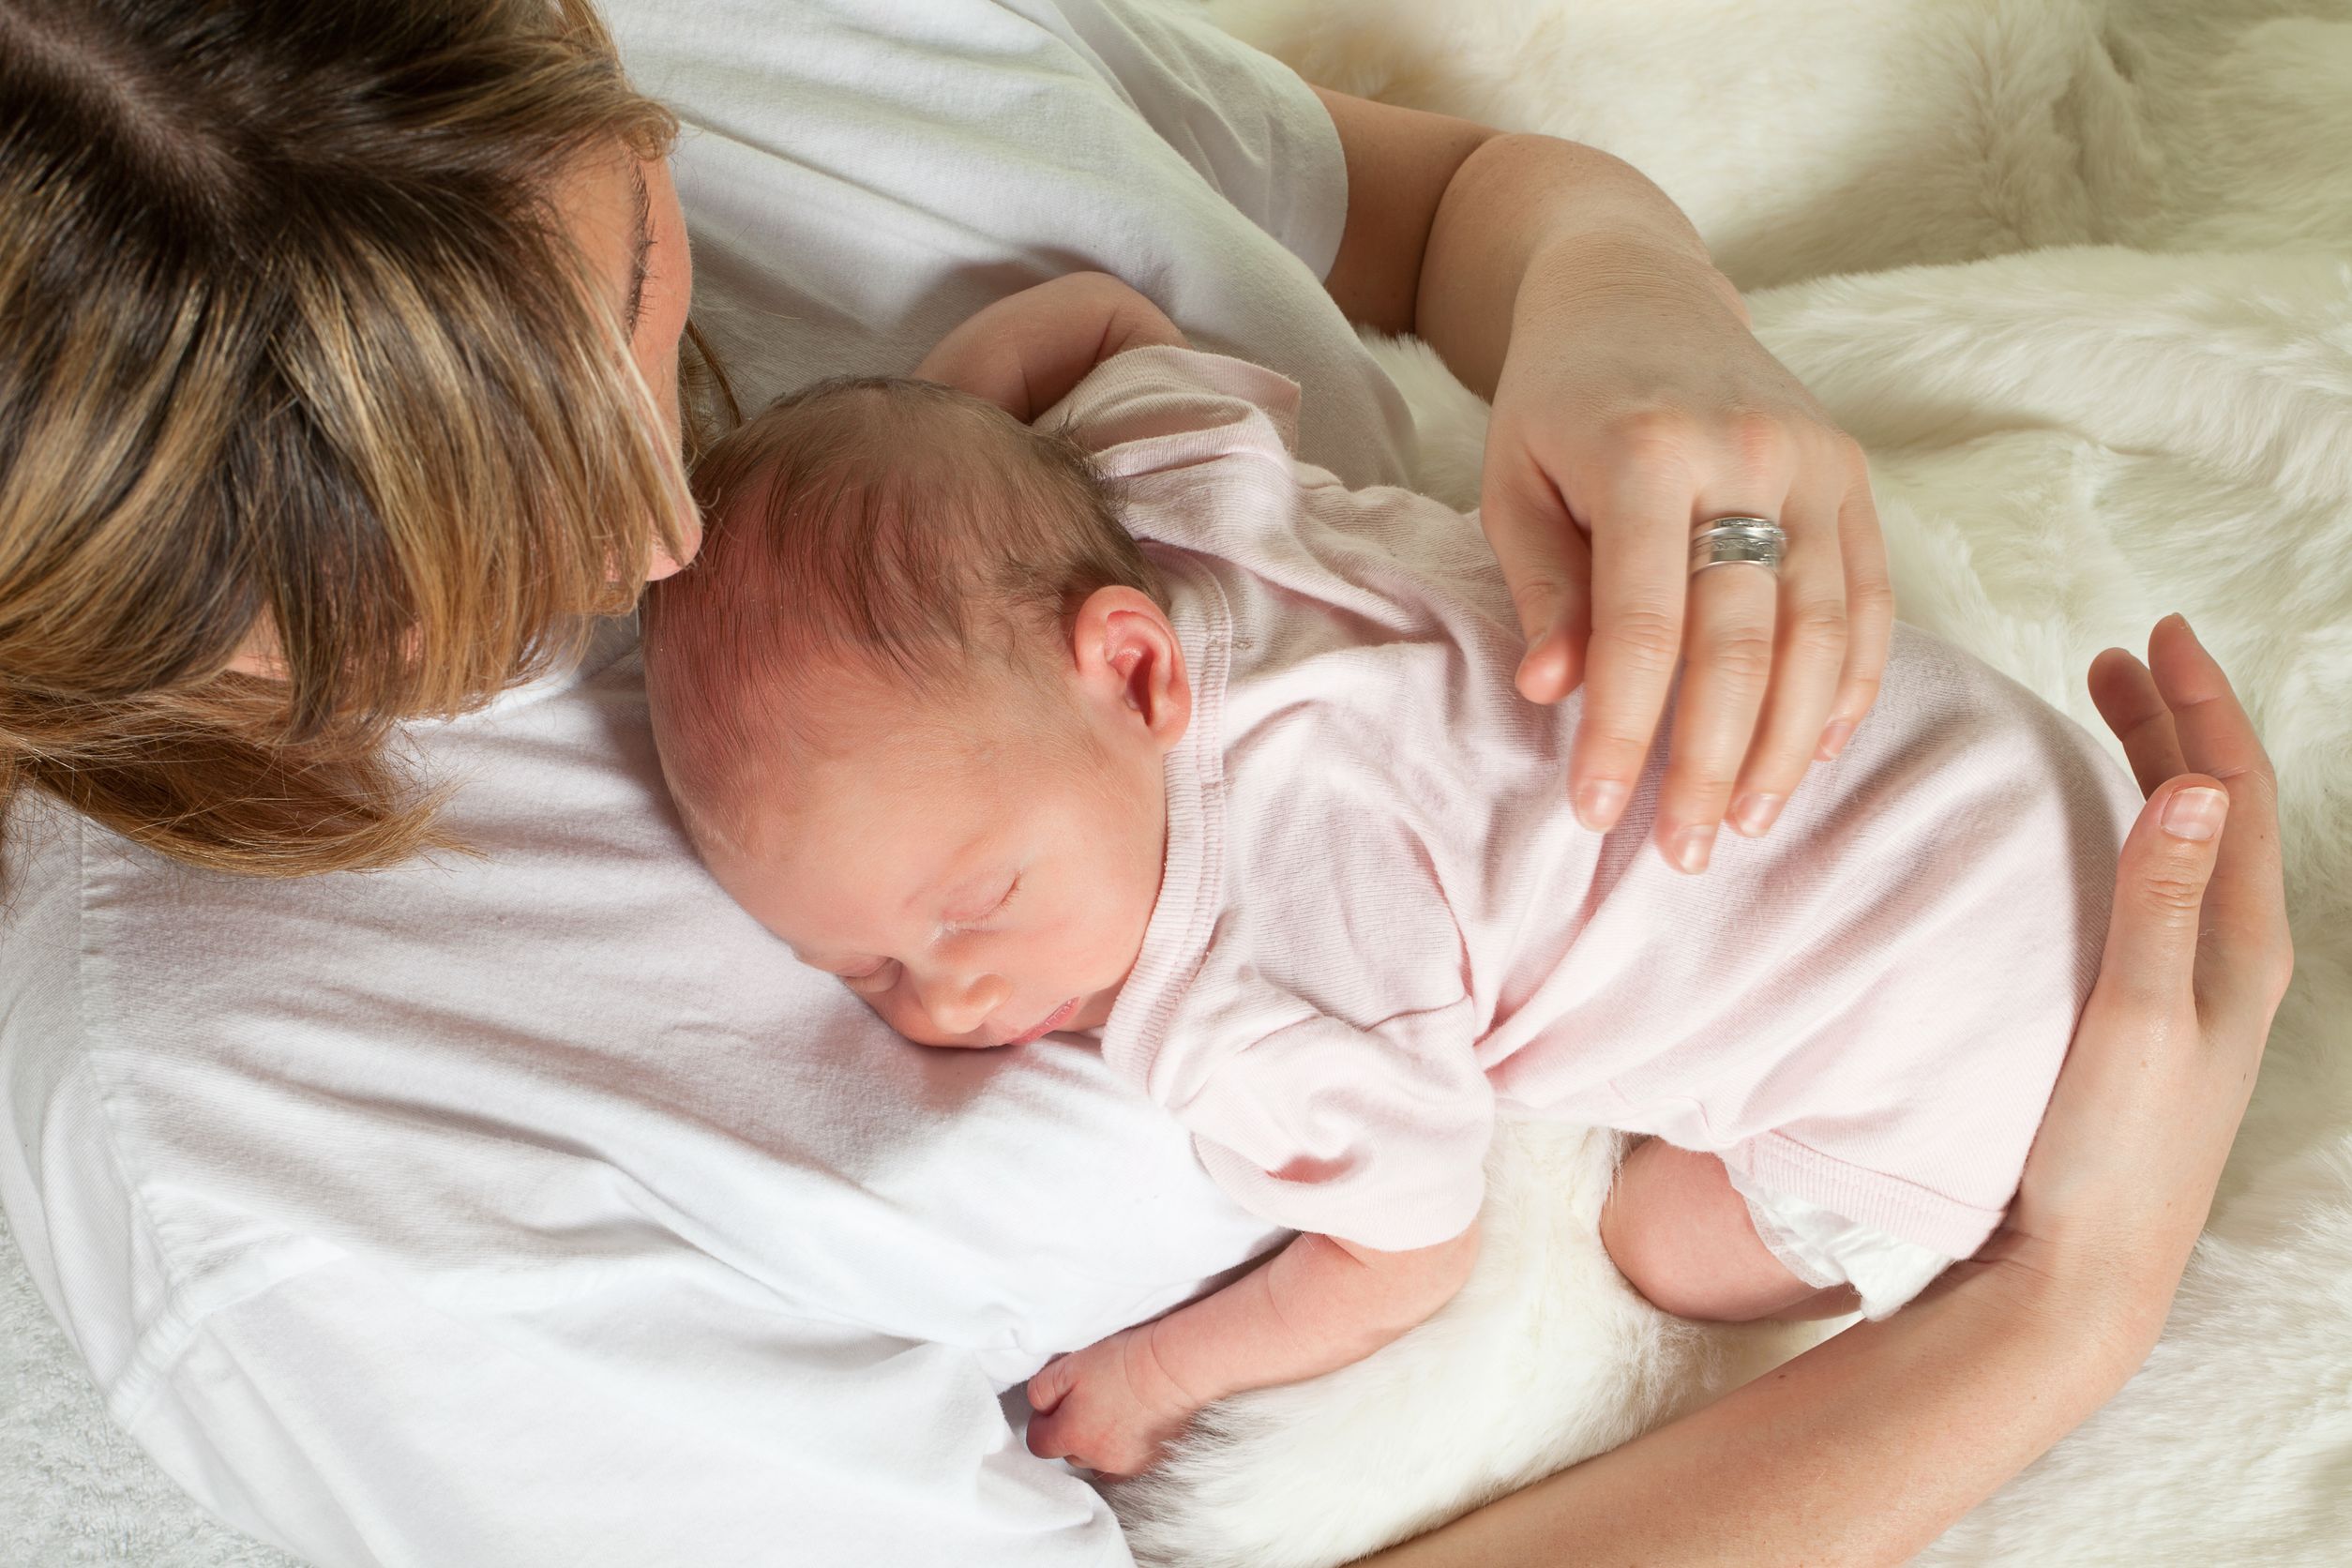 Good Mothers’ Milk Supplements Help with All Types of Breastfeeding Challenges